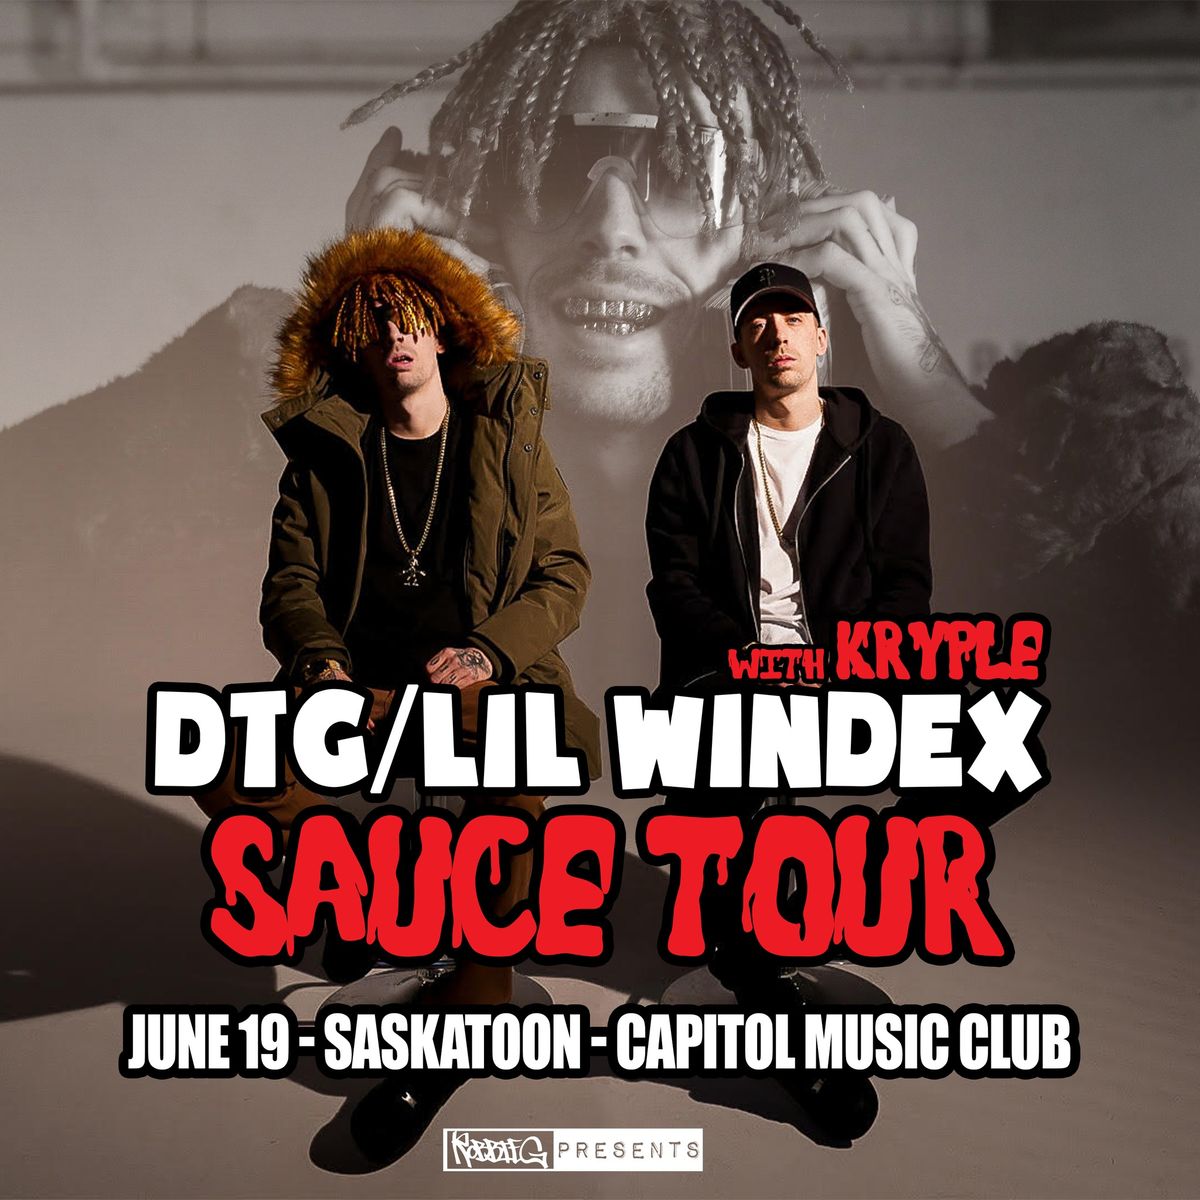 DTG\/Lil Windex in Saskatoon June 19th at Capitol Music Club with Kryple